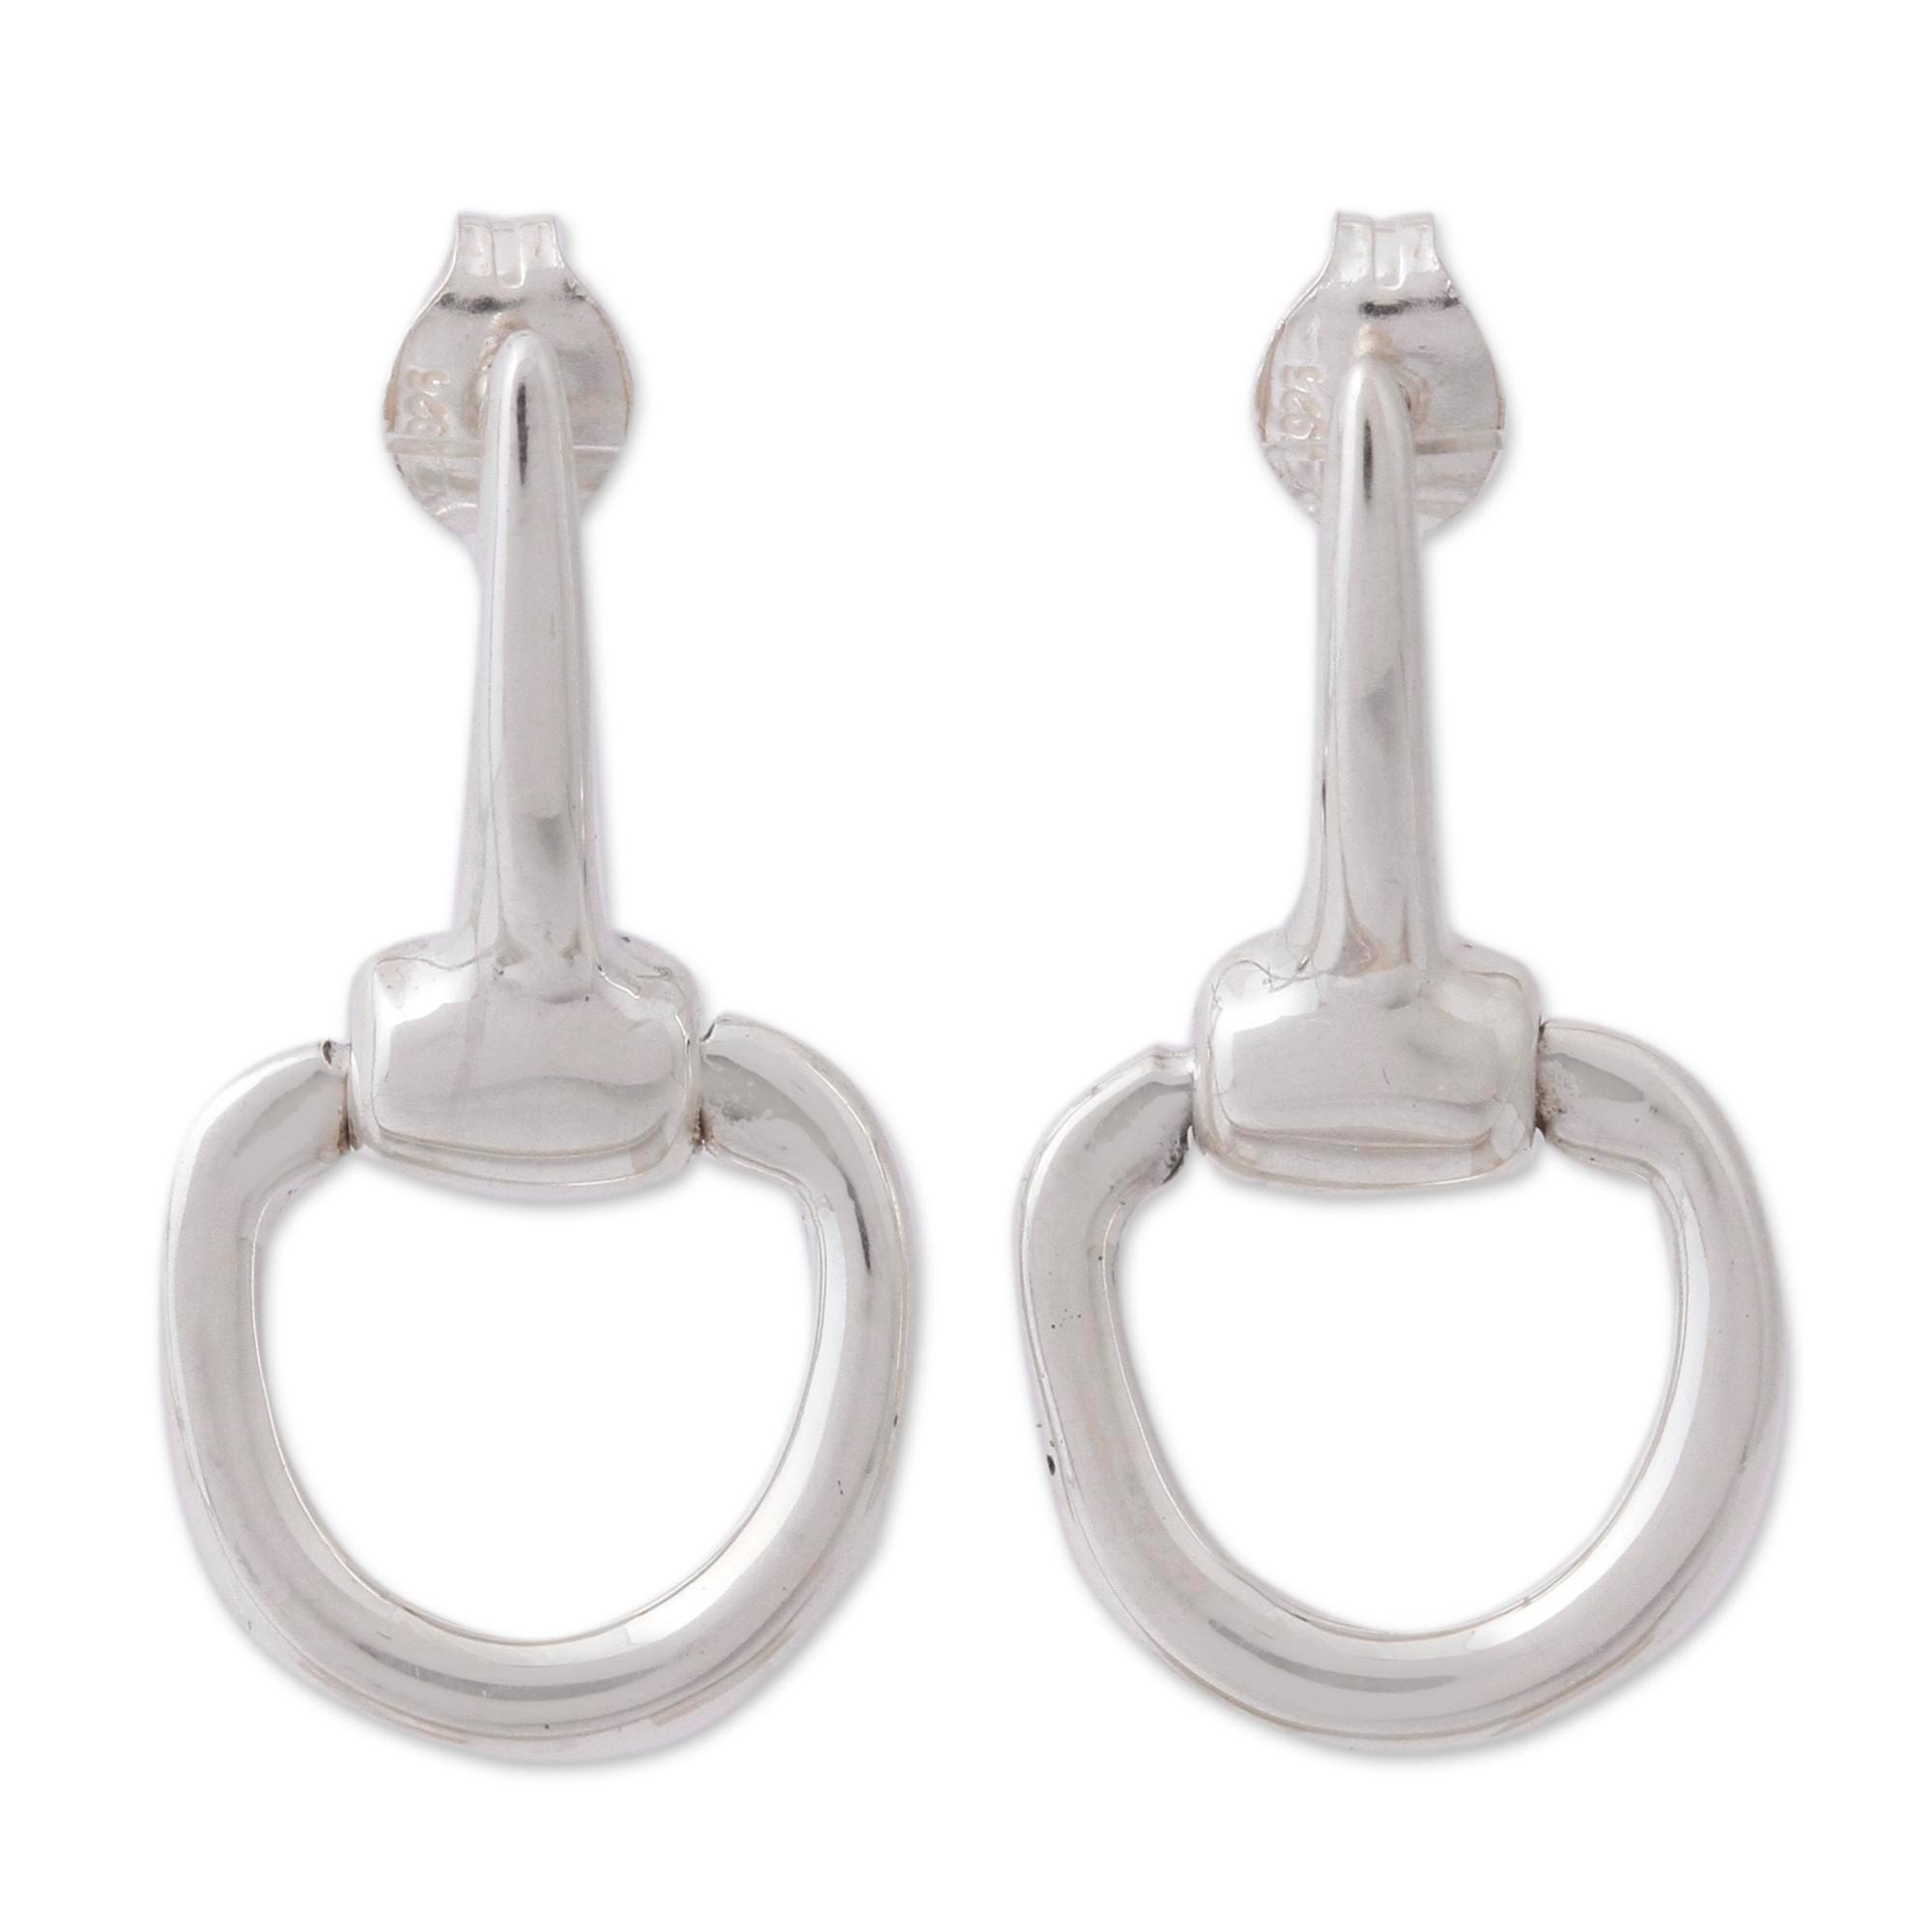 Sterling Silver Stirrup Dangle Earrings from Mexico - Gleaming Stirrups ...